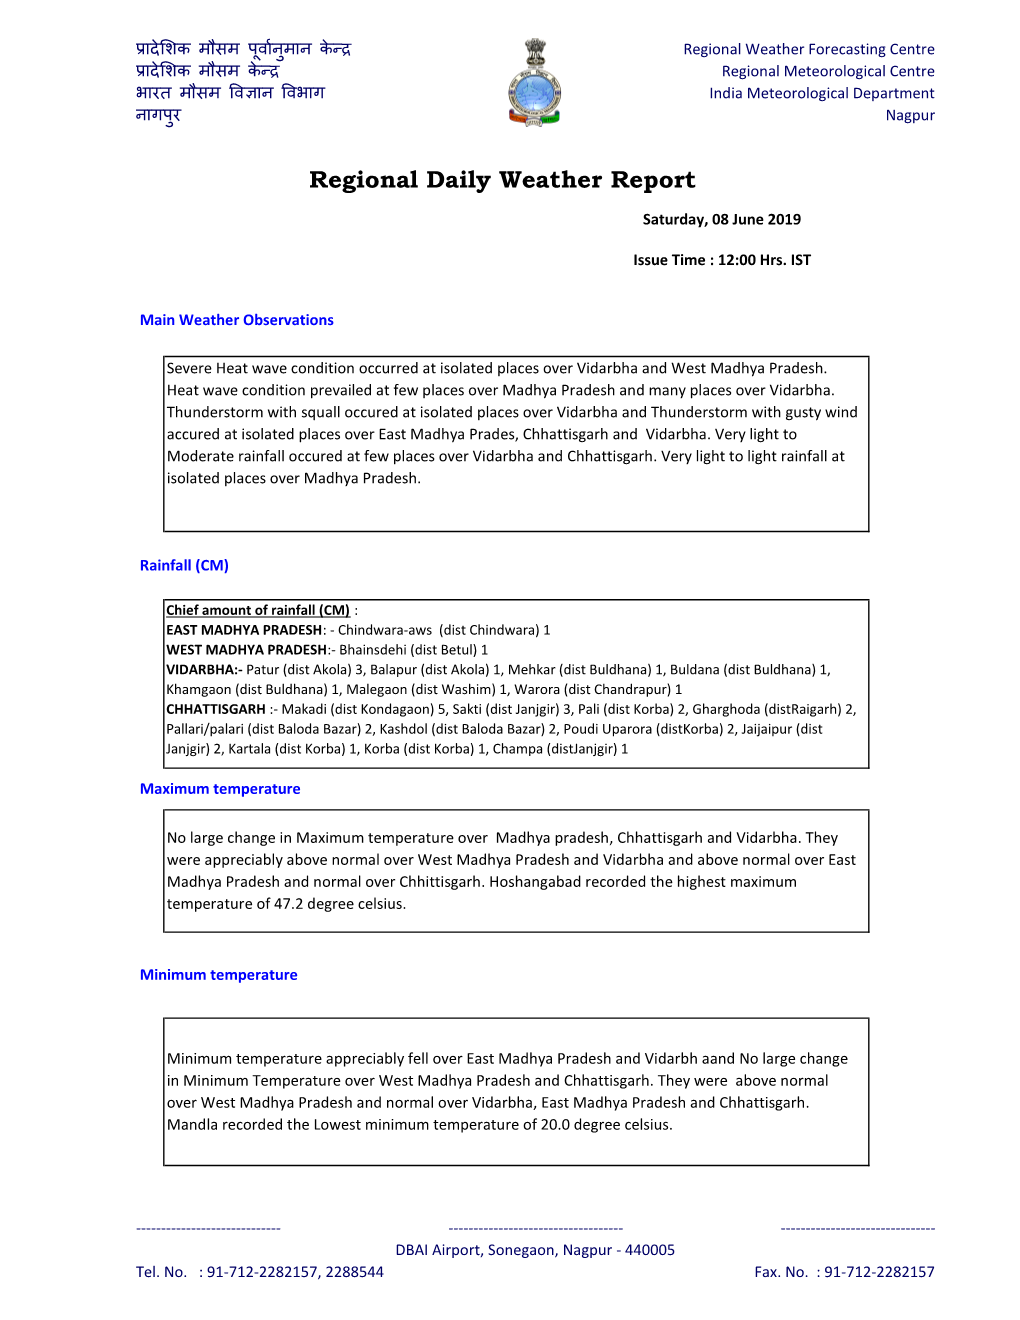 Regional Daily Weather Report